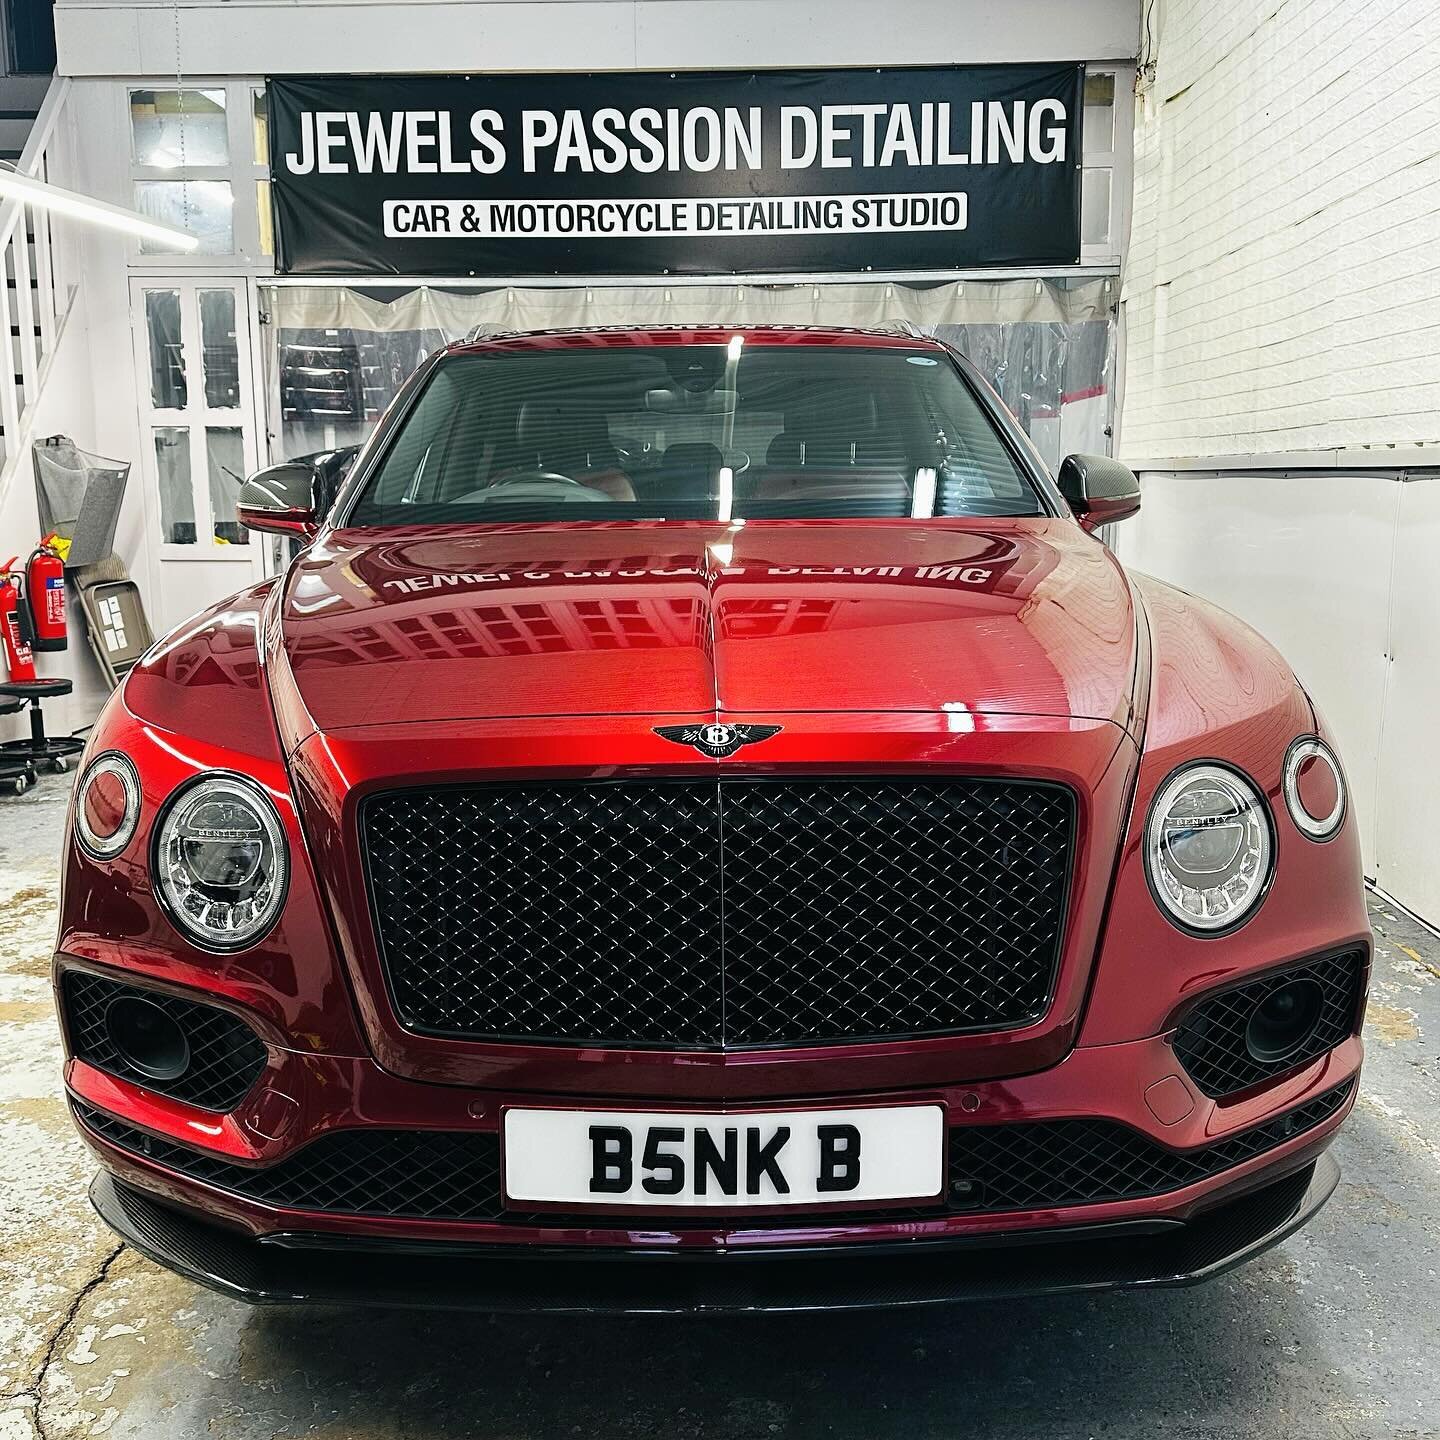 Bentley Bentayga Paintwork Fully Restored Prior To Paint Protection Film (PPF) Installation at our London Car Detailing Studio

As always another very happy customer 

Get in contact for the best service and the most competitive quote 

⬇️ Contact us